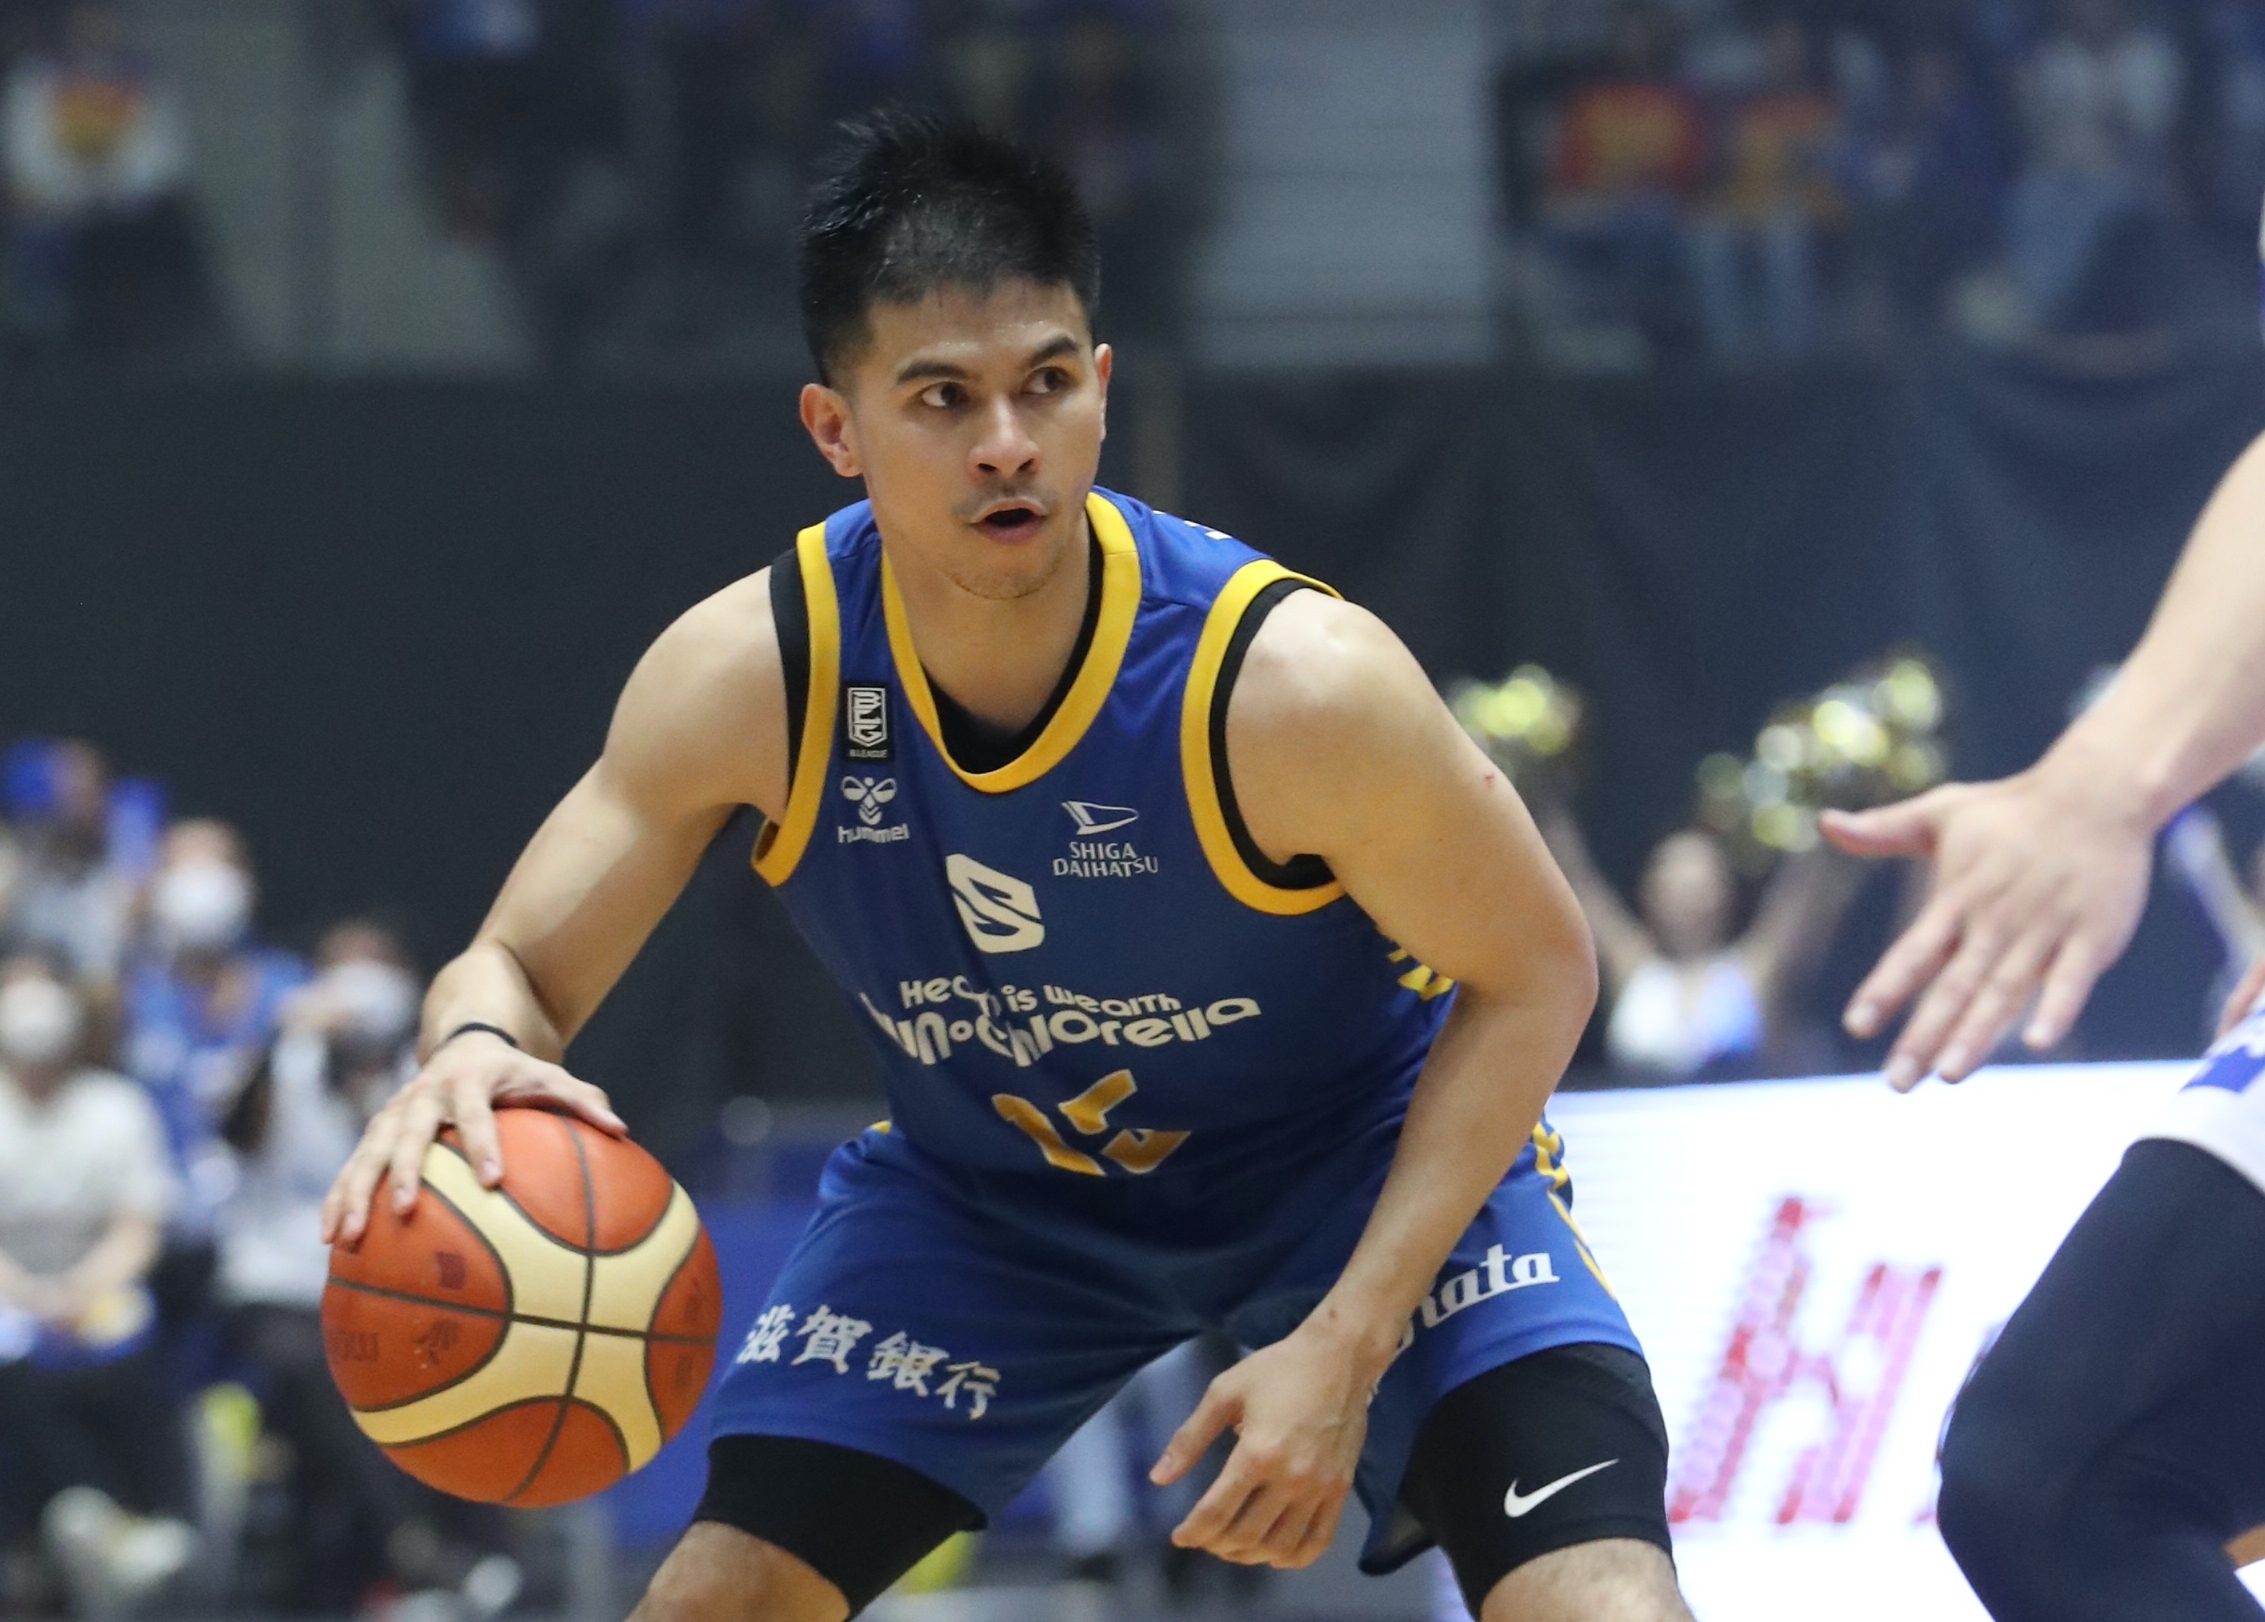 No slowing down: Kiefer Ravena impresses anew as Shiga moves on cusp of B2 finals